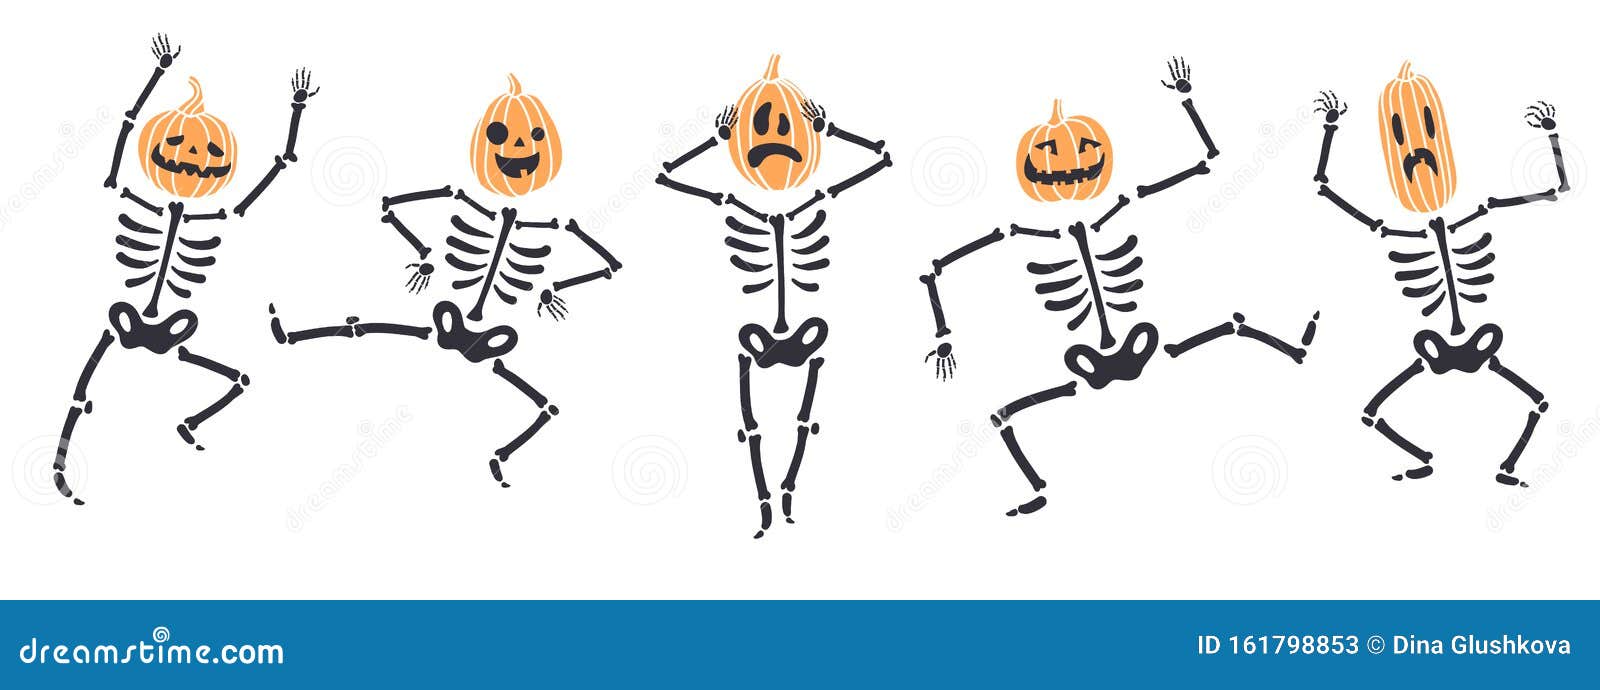 Illustration about Funny Halloween skeletons in different poses with pumpki...